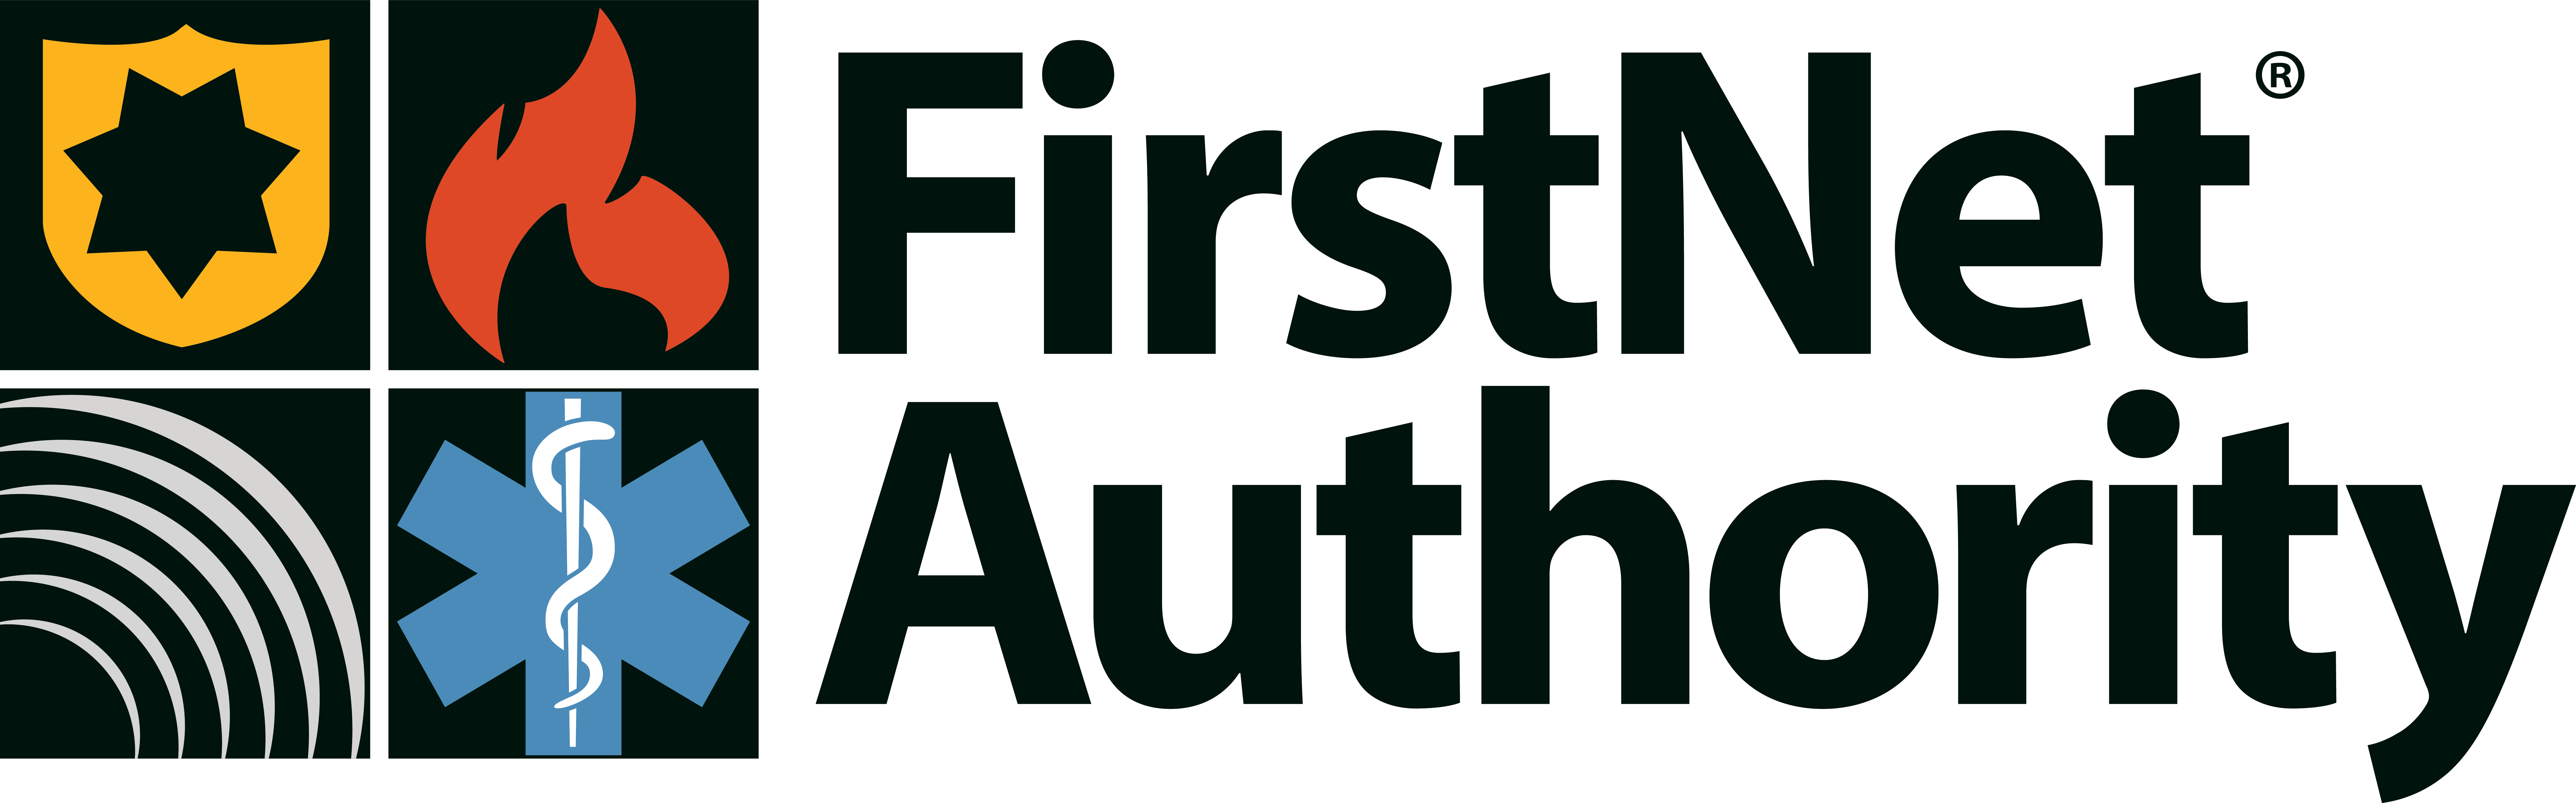 FirstNetAuthority Logo 2020 color - FirstNet CEO